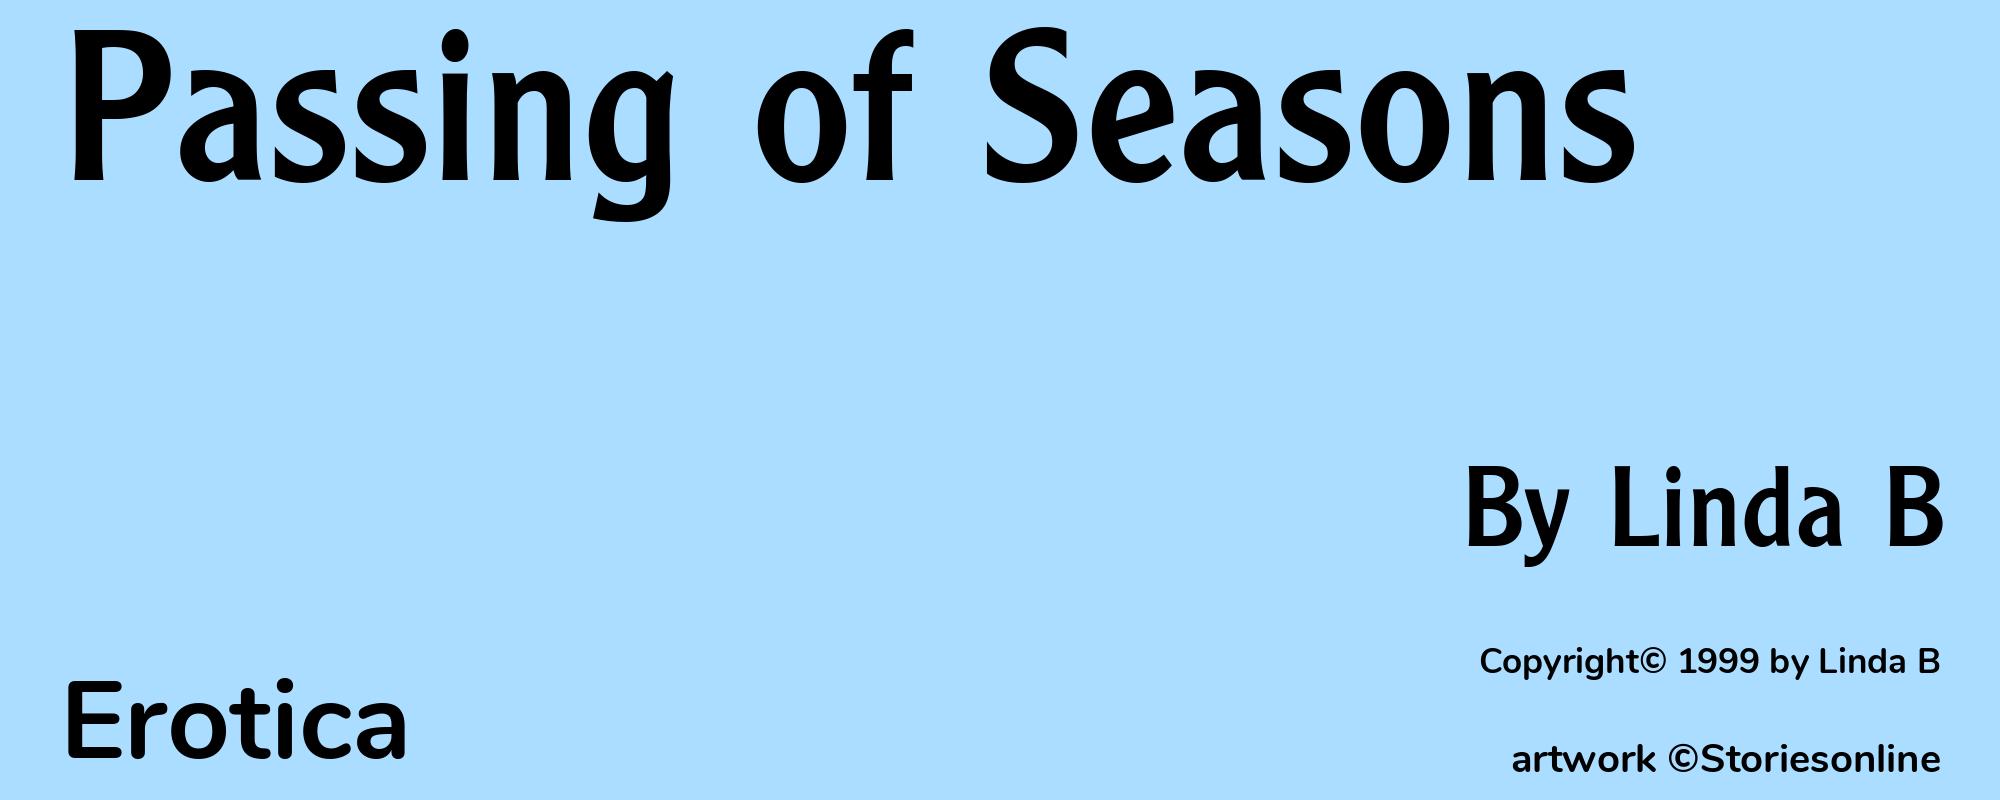 Passing of Seasons - Cover